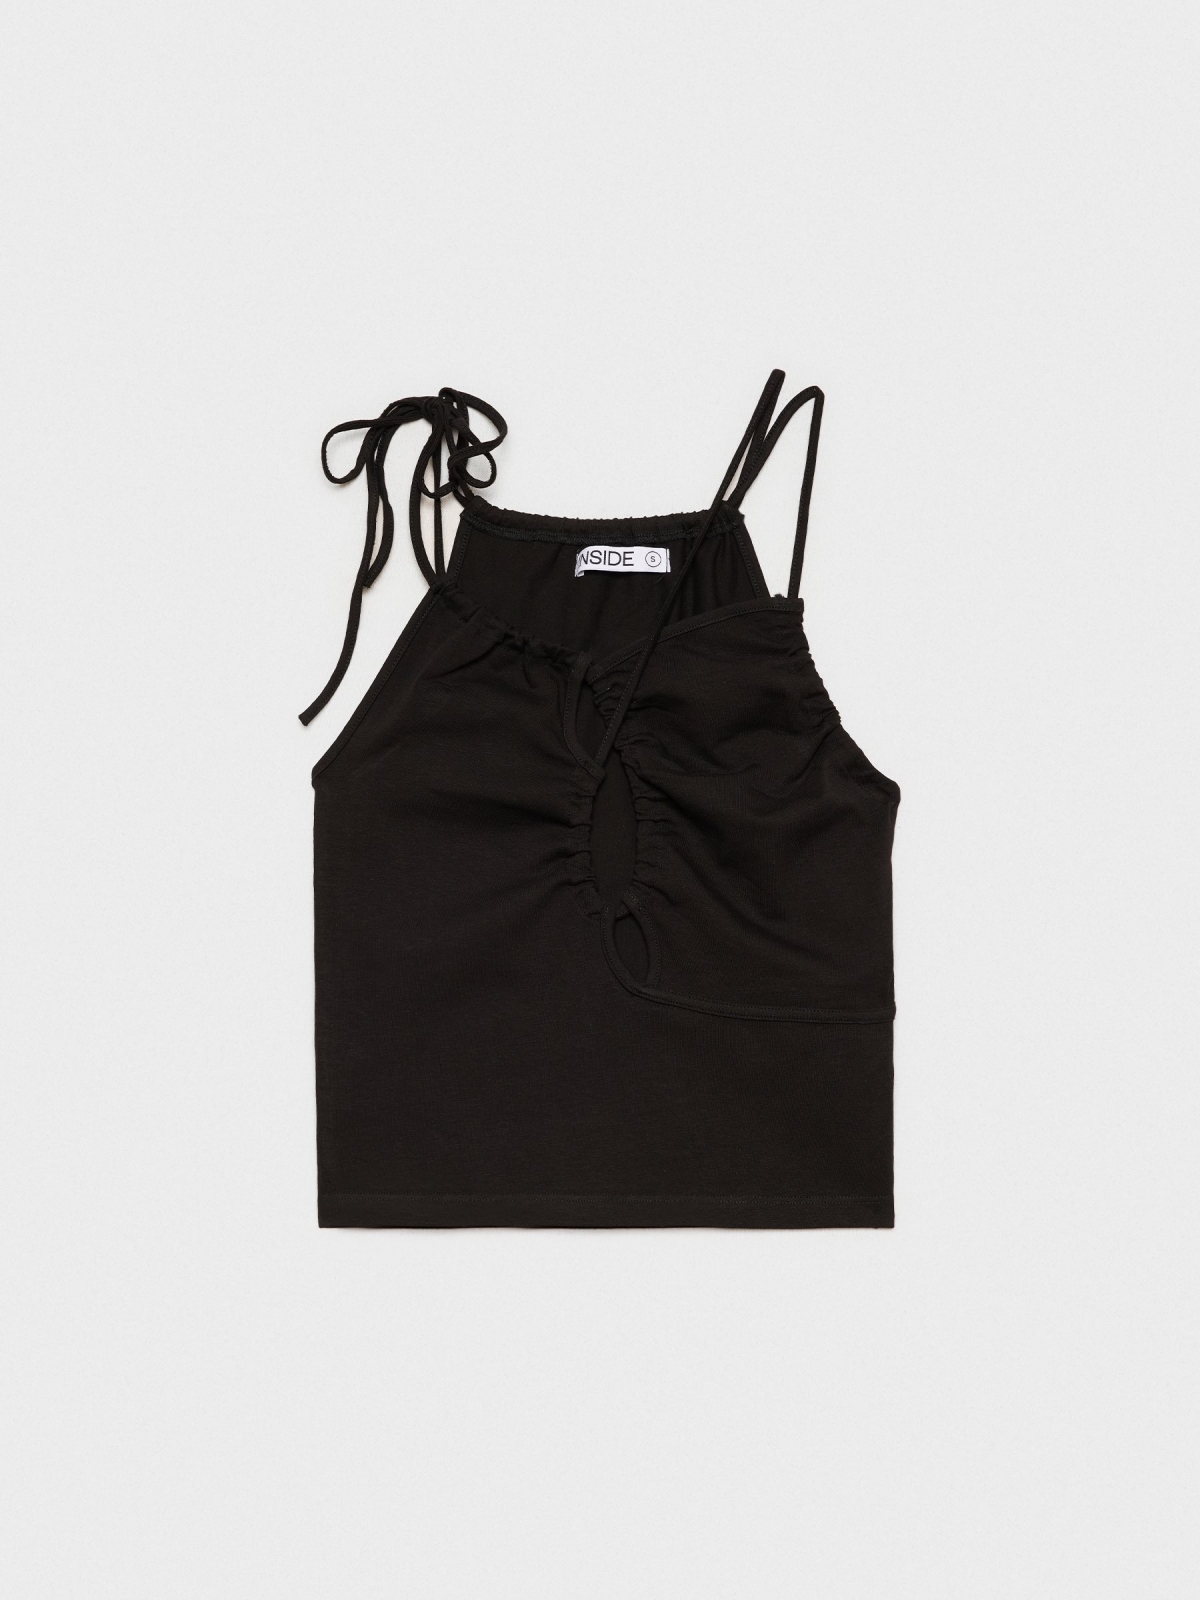  Top cut out halter negro